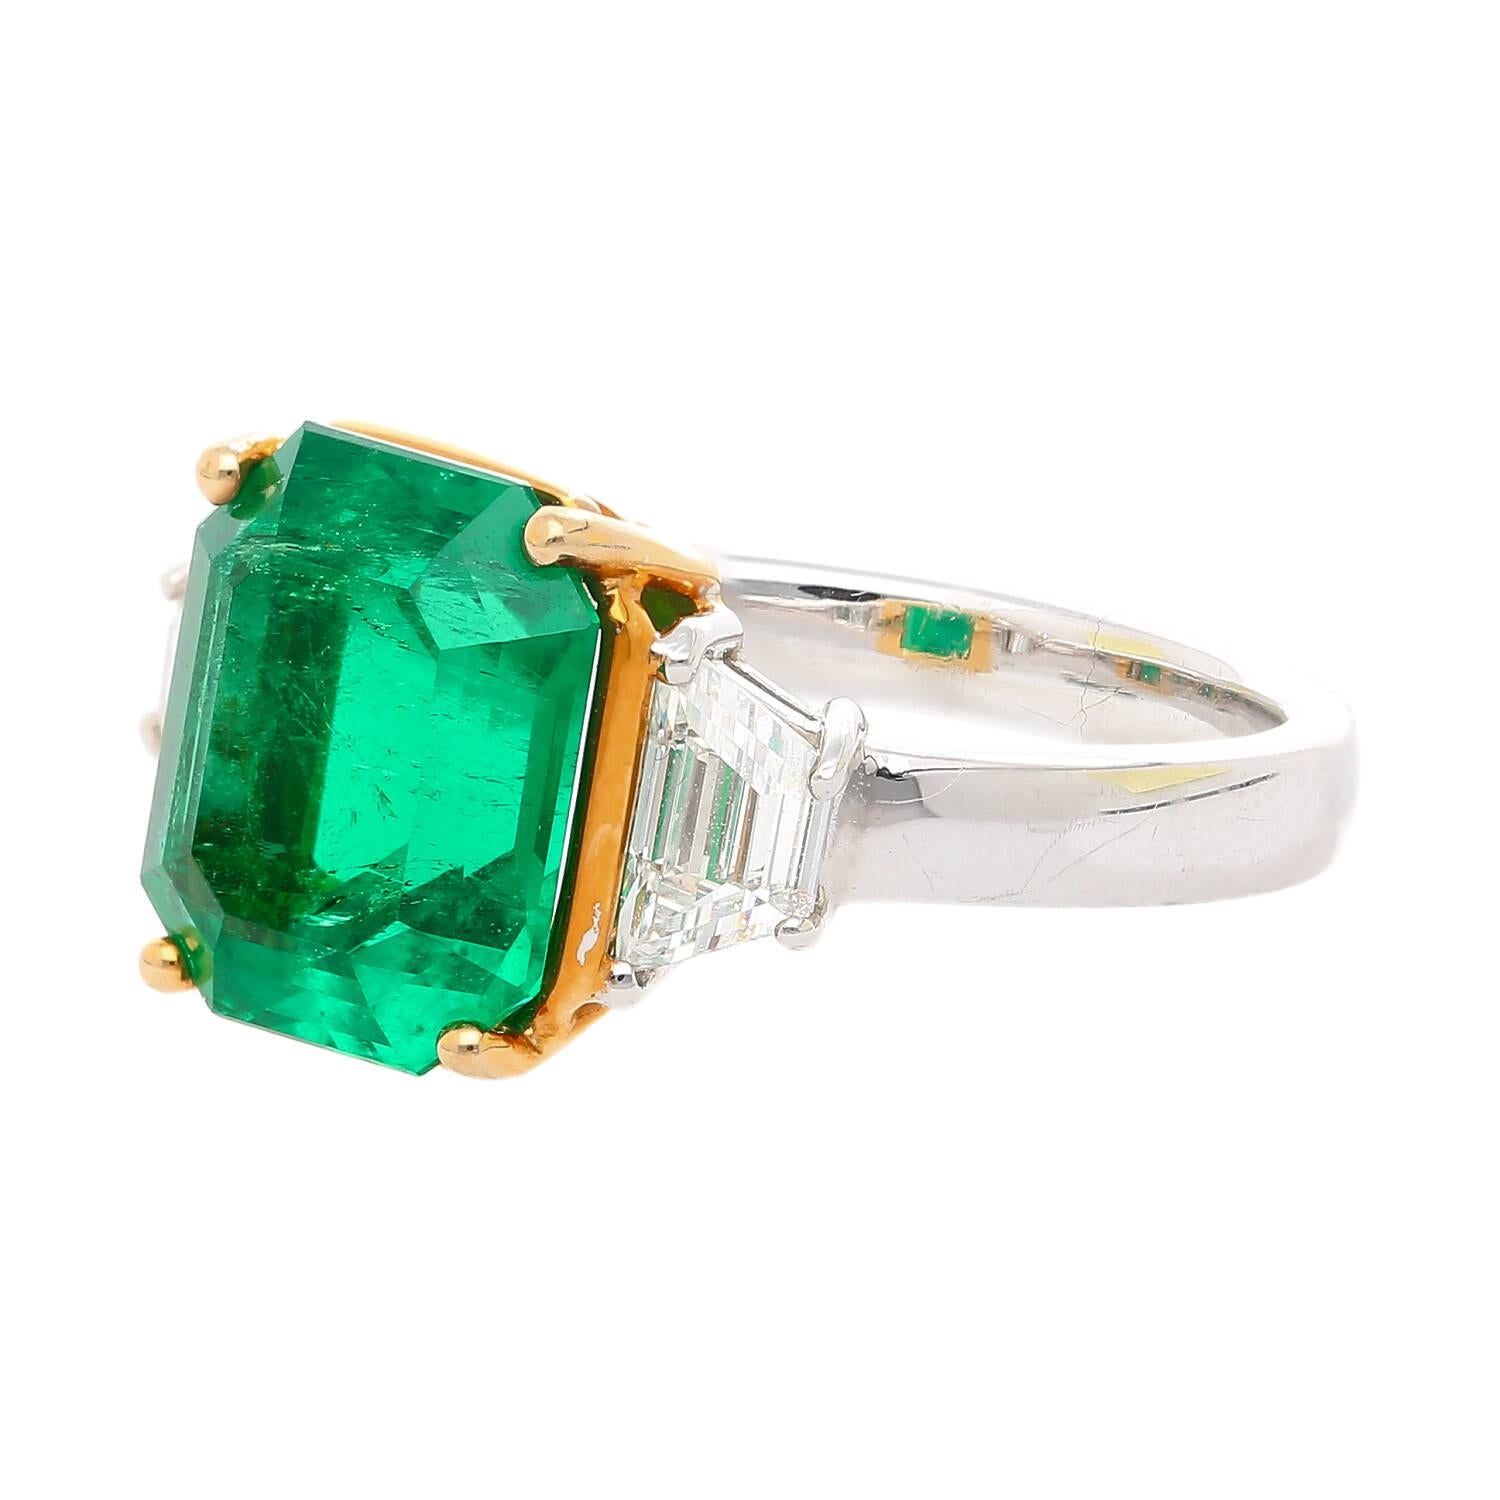 GRS certified 4.90 Carat Insignificant Oil Colombian Emerald With 1.01 Carats in Trapezoid Cut Side Stones, Set in a Platinum and 18K Gold 3-Stone Ring. A gorgeous, minimalist design ring with a center stone that's anything but minimalist. 

Created